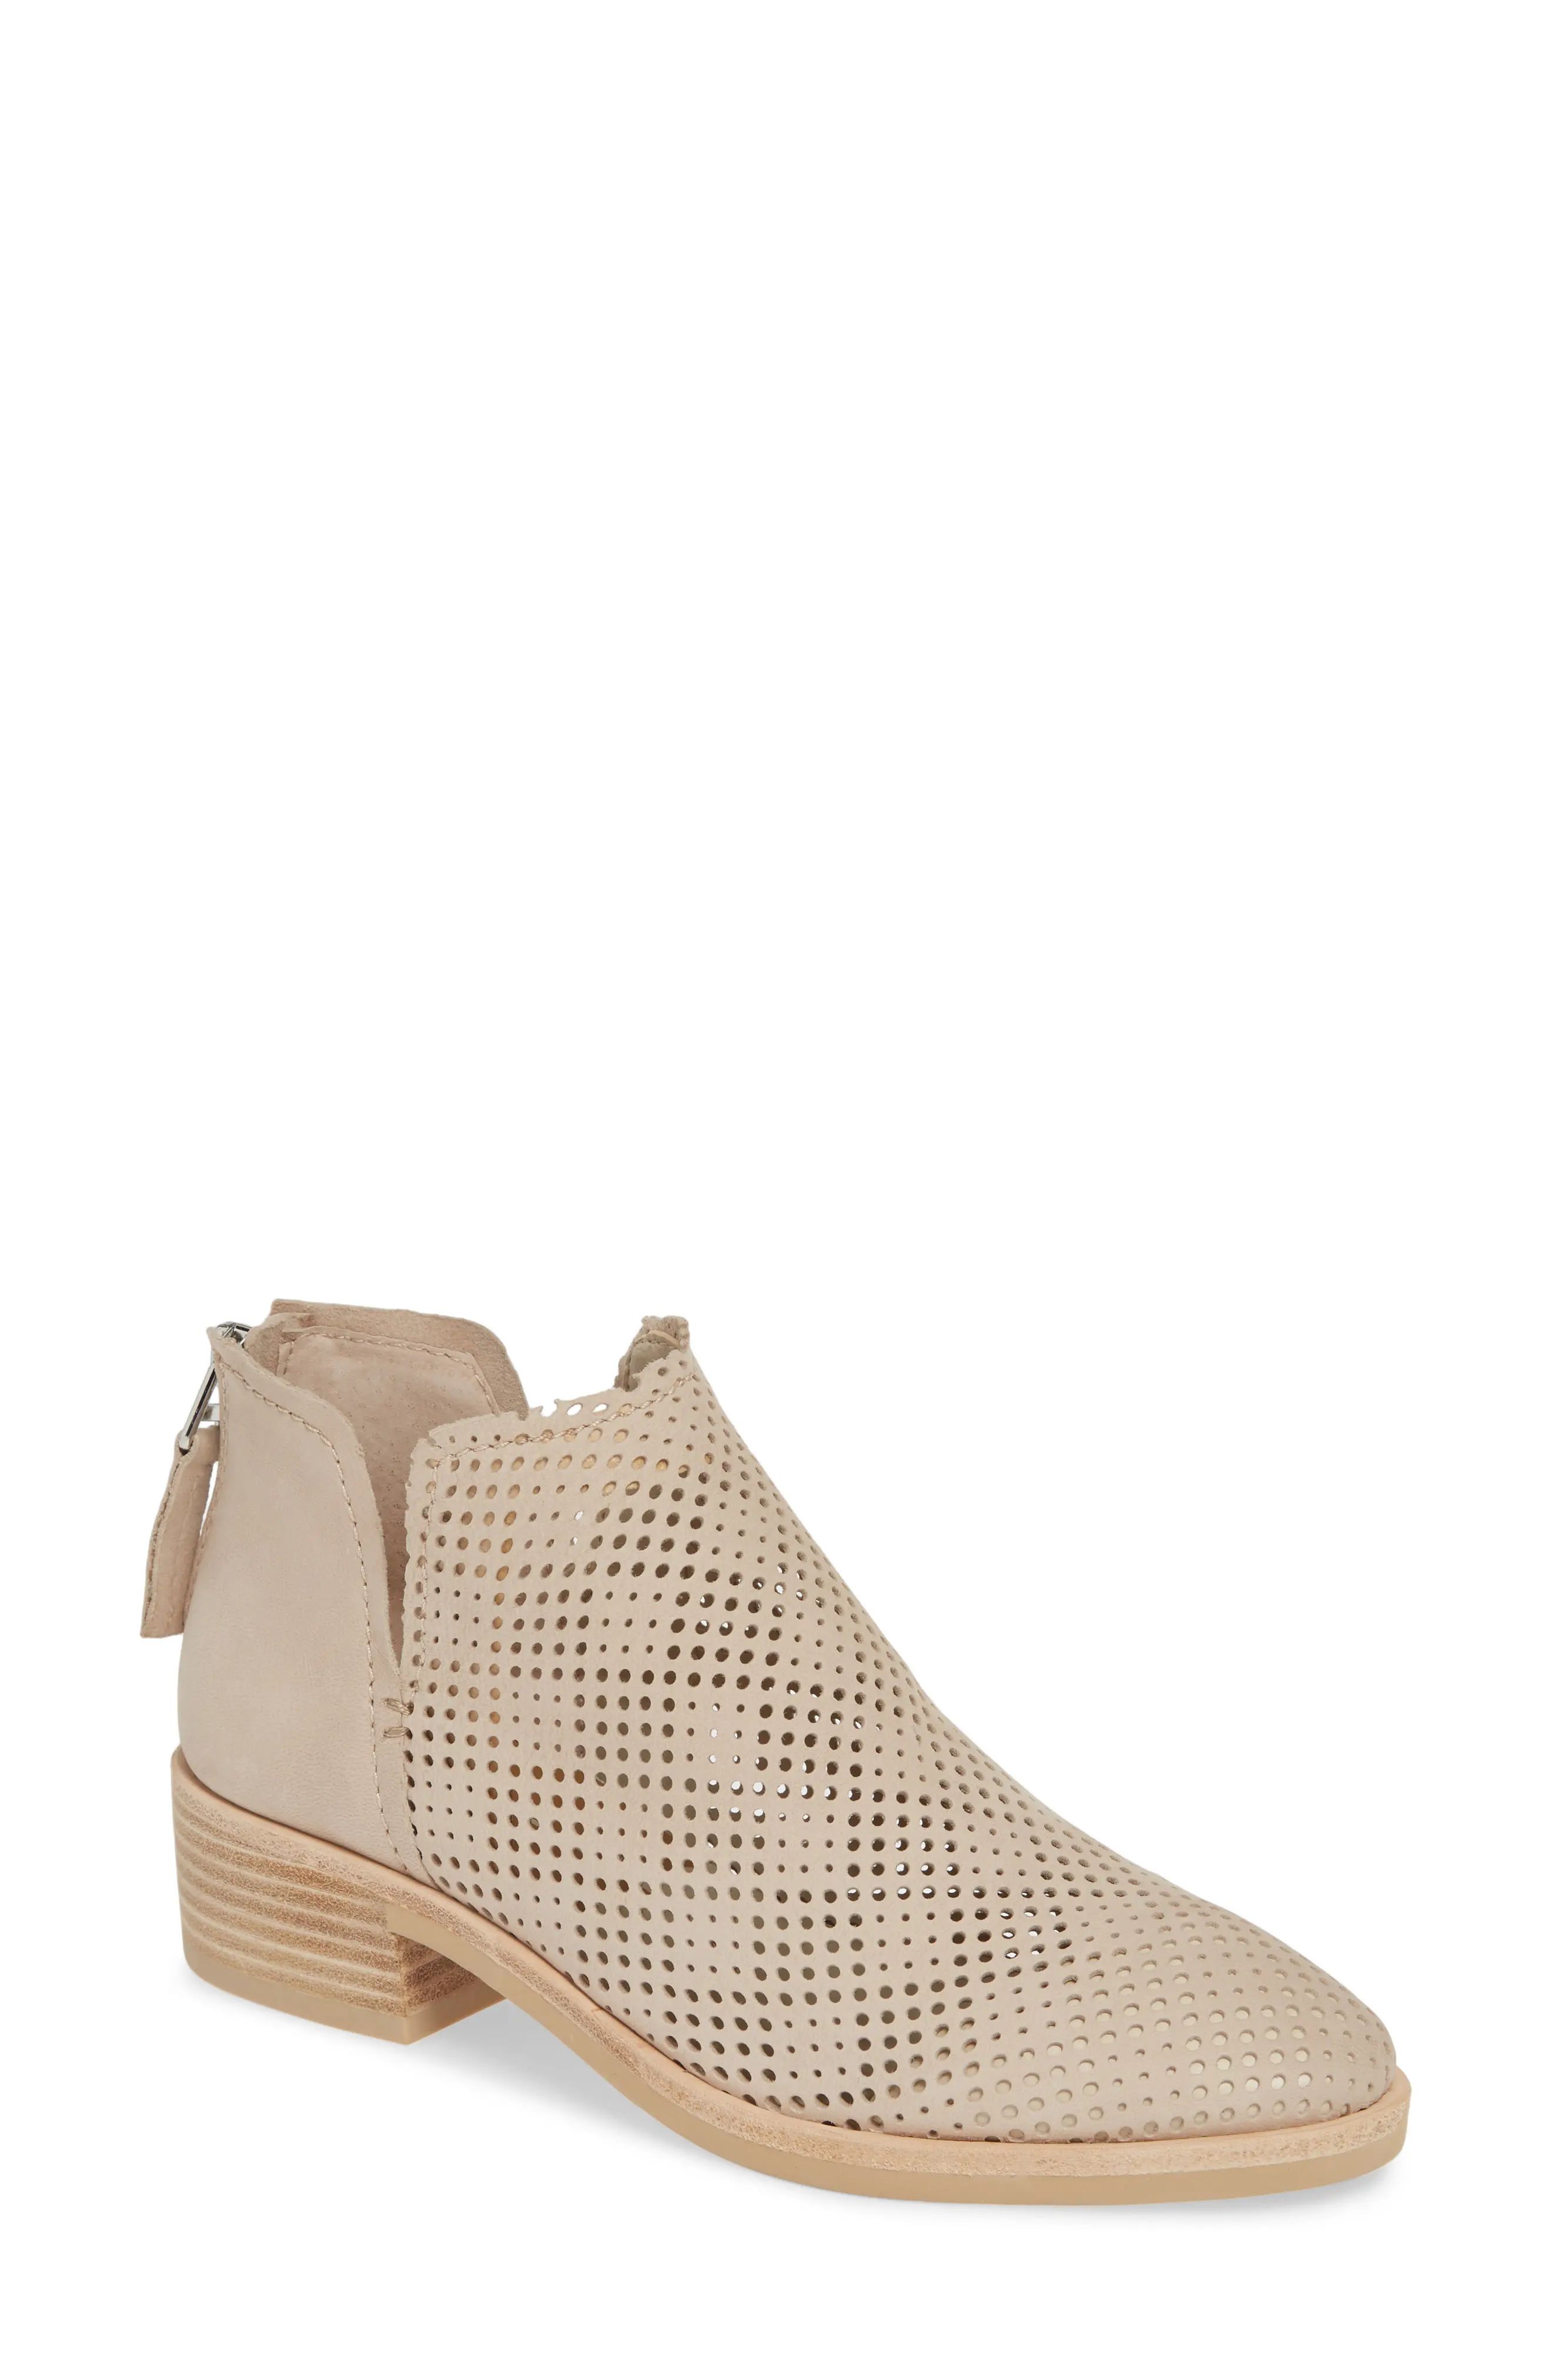 Women's Dolce Vita Tauris Perforated Bootie | Nordstrom